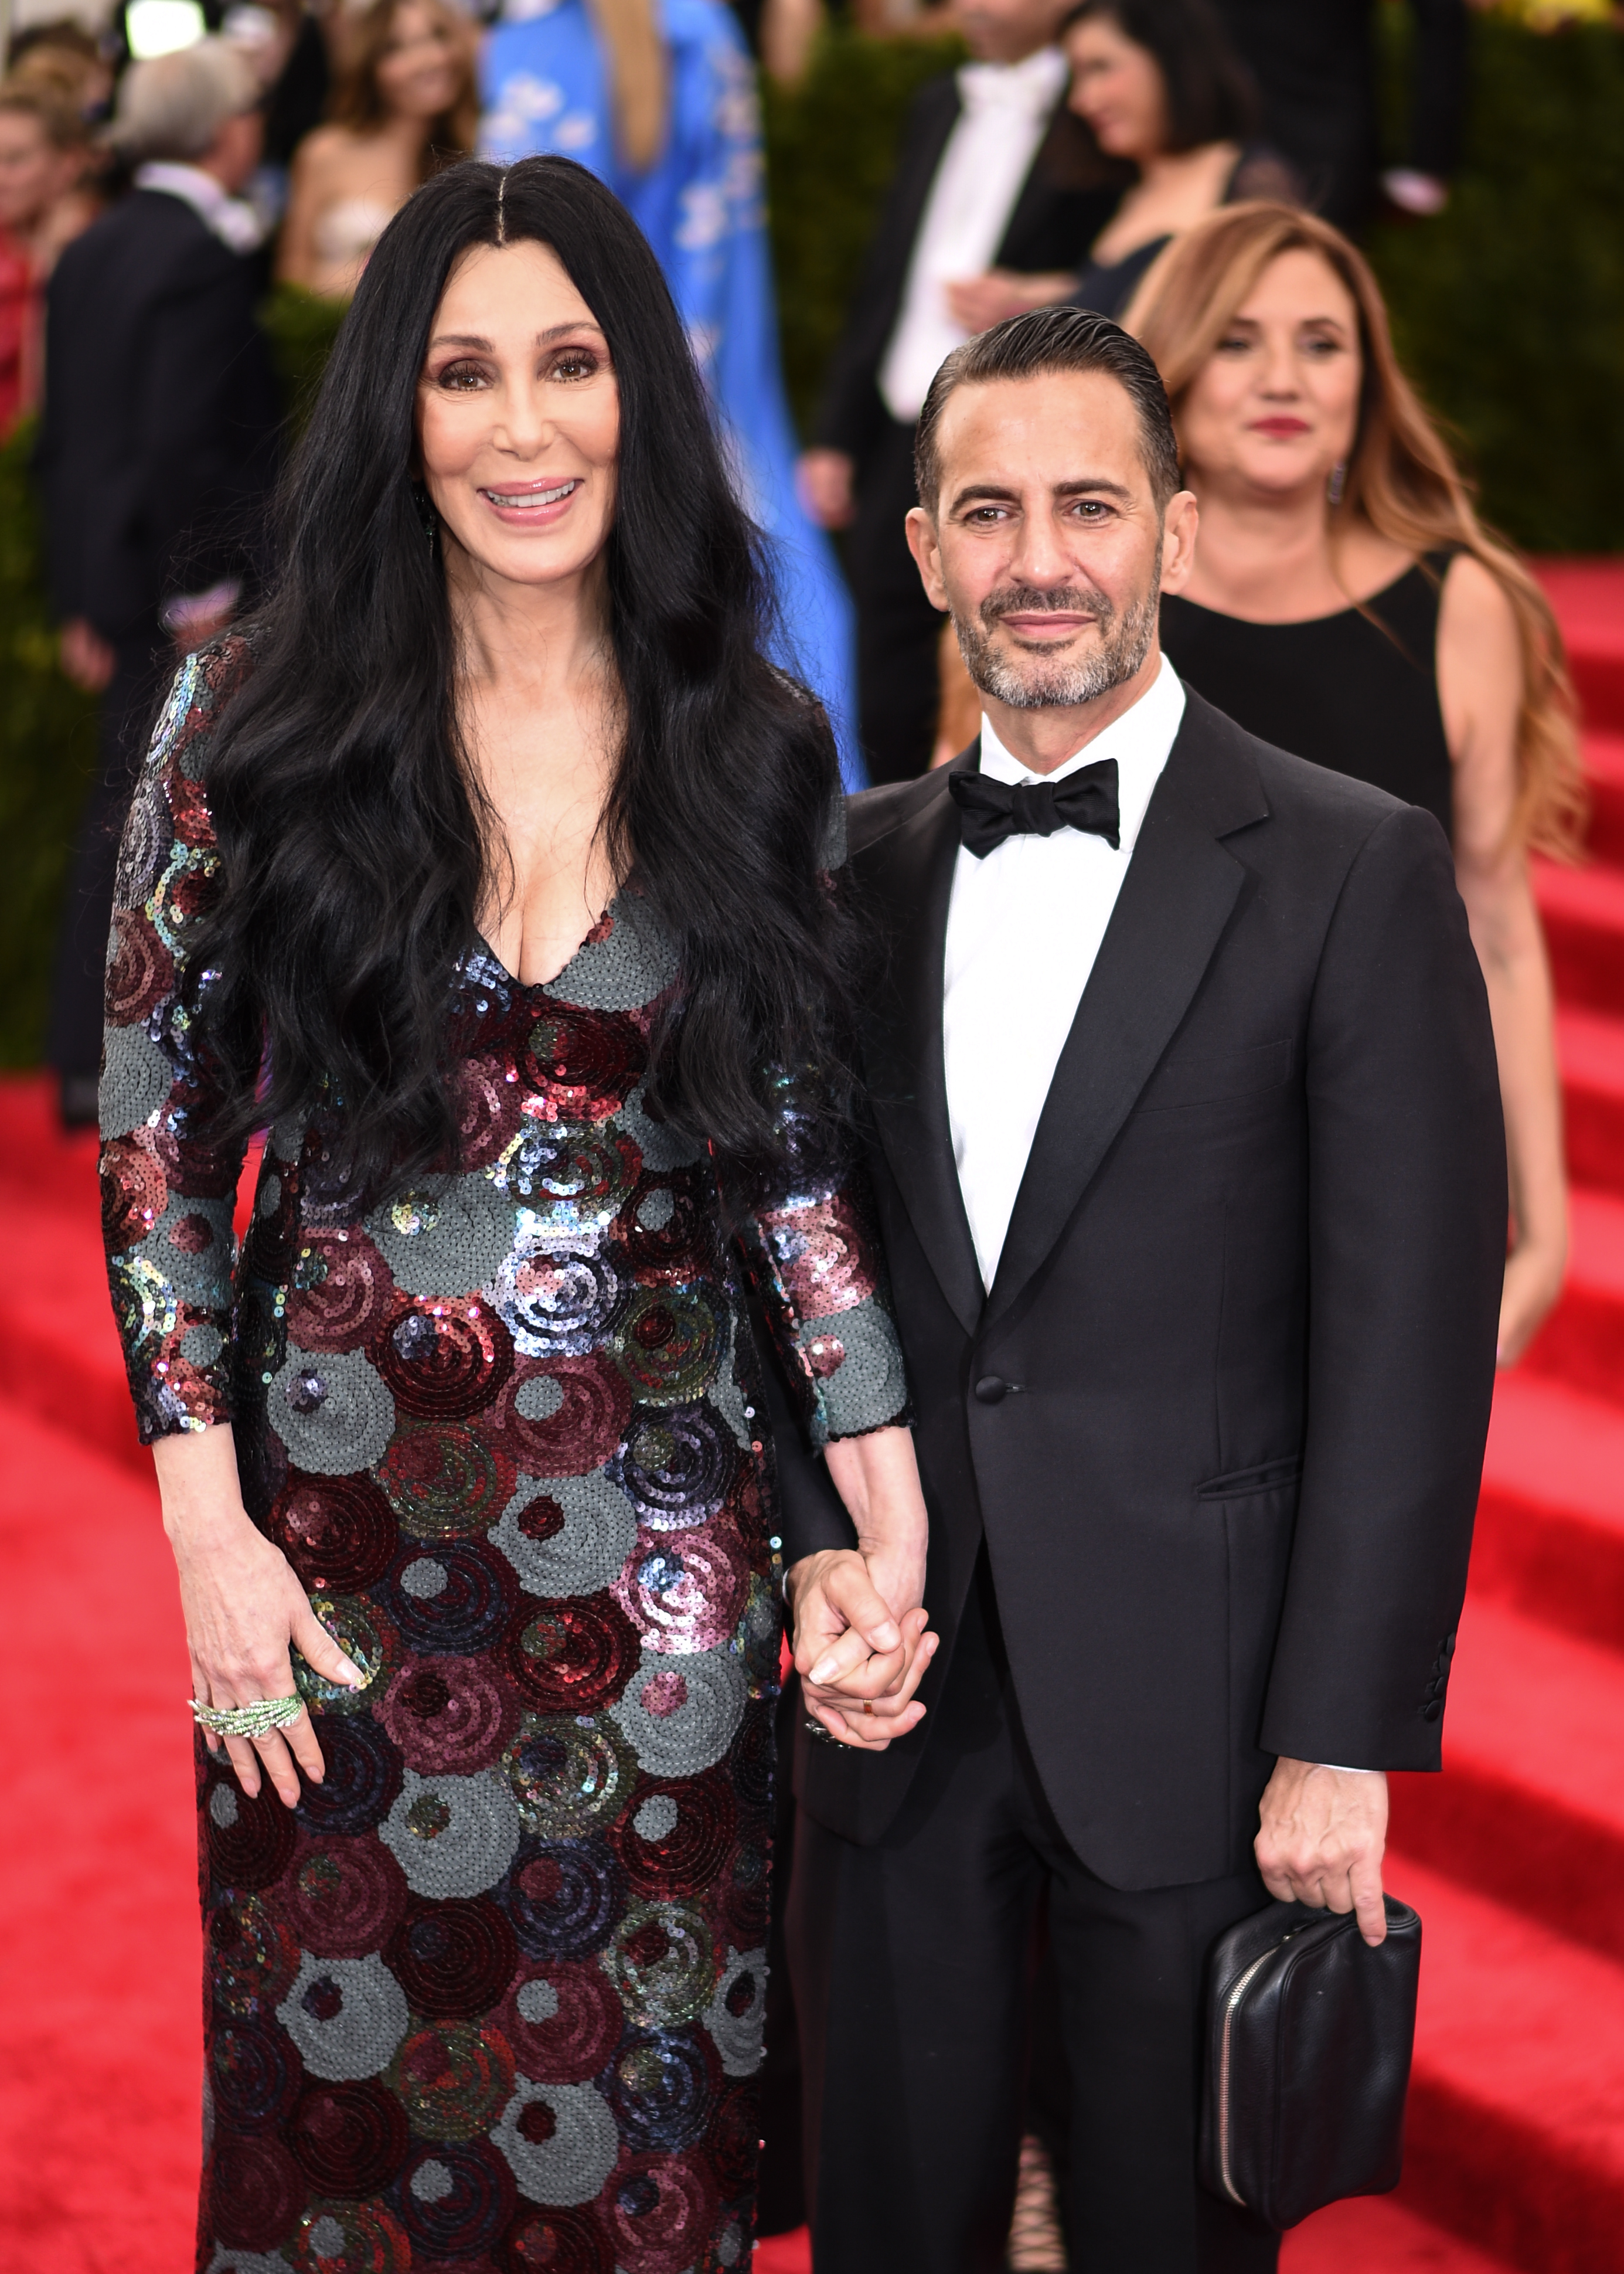 Cher and Marc Jacobs attend the "China: Through The Looking Glass" Costume Institute Benefit Gala at the Metropolitan Museum of Art in New York City, on May 4, 2015. | Source: Getty Images